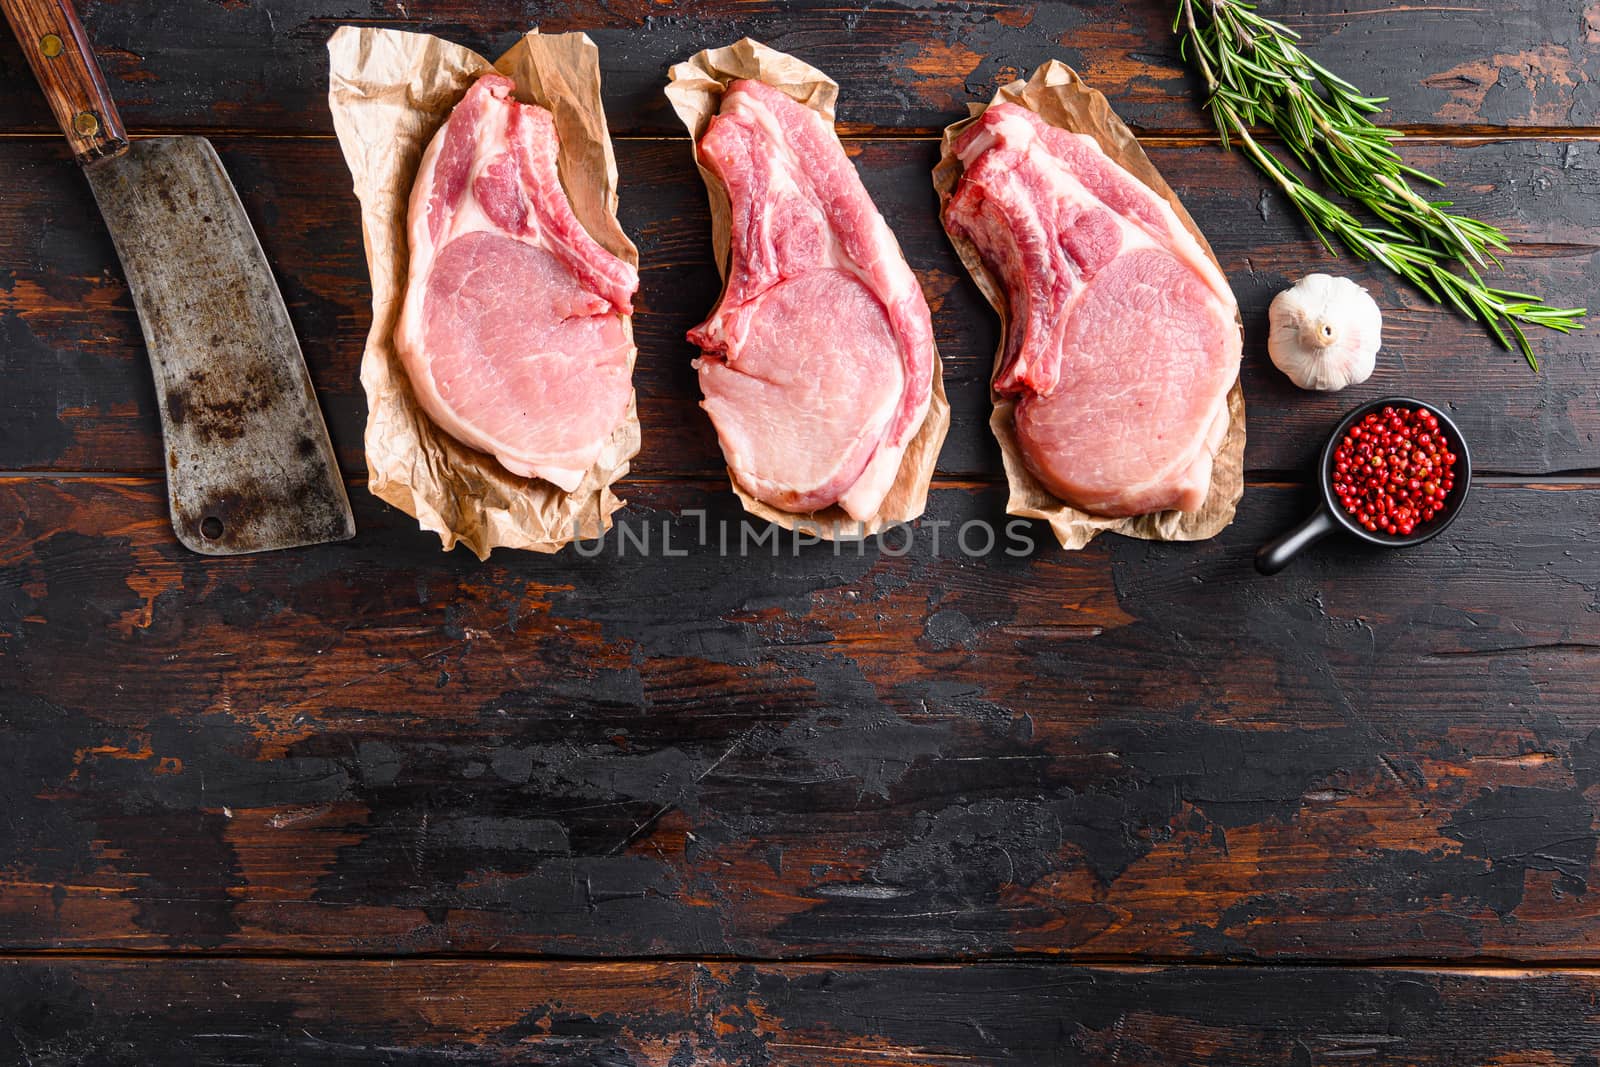 Concept organic pork meat set for grill with old american butcher knife or cleaver over old rustic dark wood table with herbs and ingrefients top view space for text. High quality photo